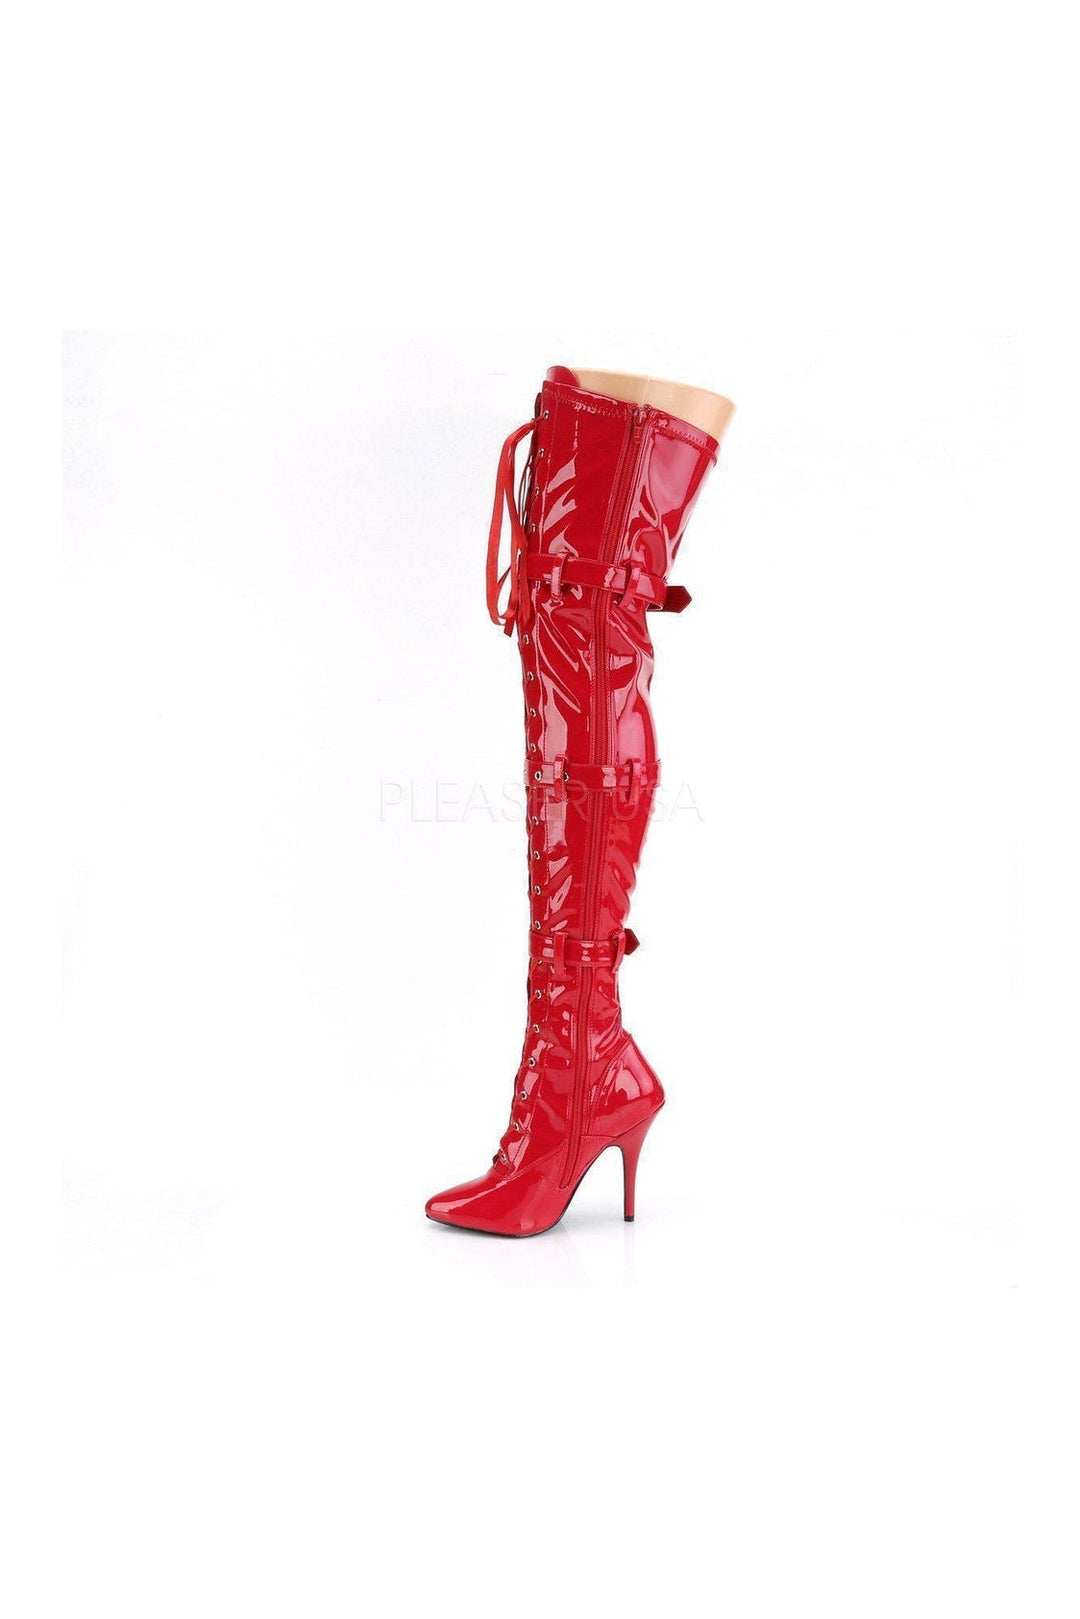 SEDUCE-3028 Thigh Boot | Red Patent-Pleaser-SEXYSHOES.COM